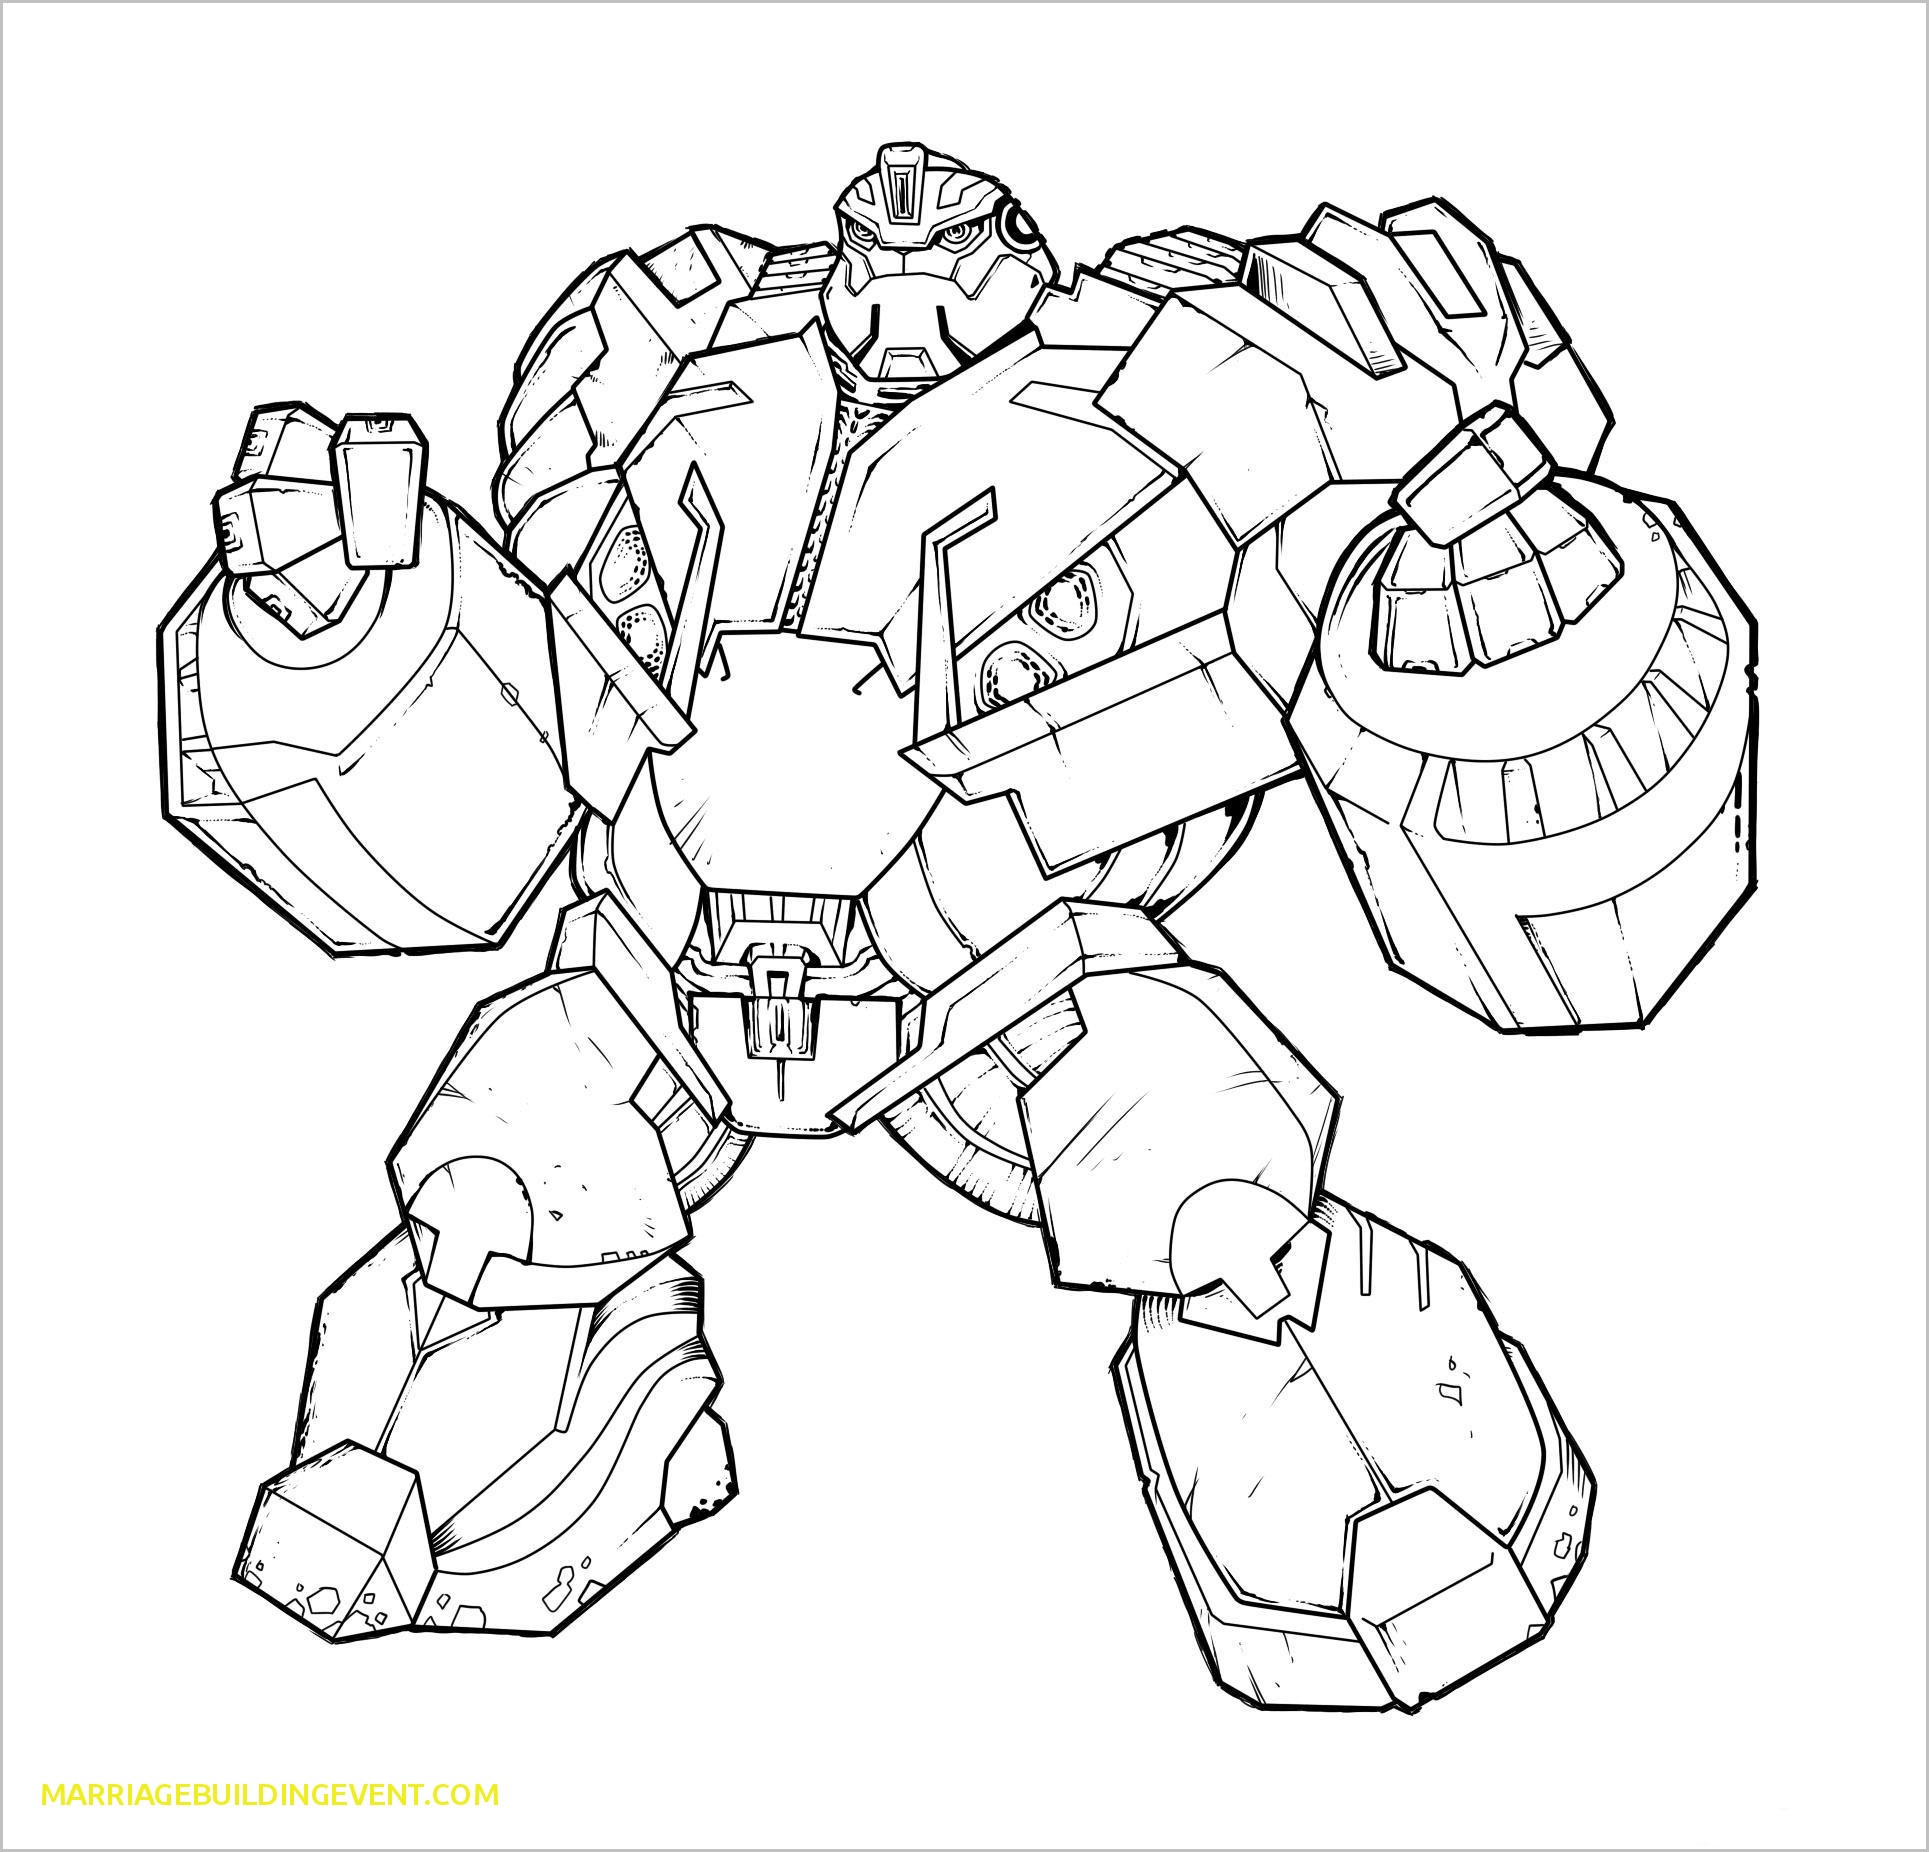 Coloring Pages : Transformer Coloring Pages Optimusme Free Dinosaurs - Transformers 4 Coloring Pages Free Printable